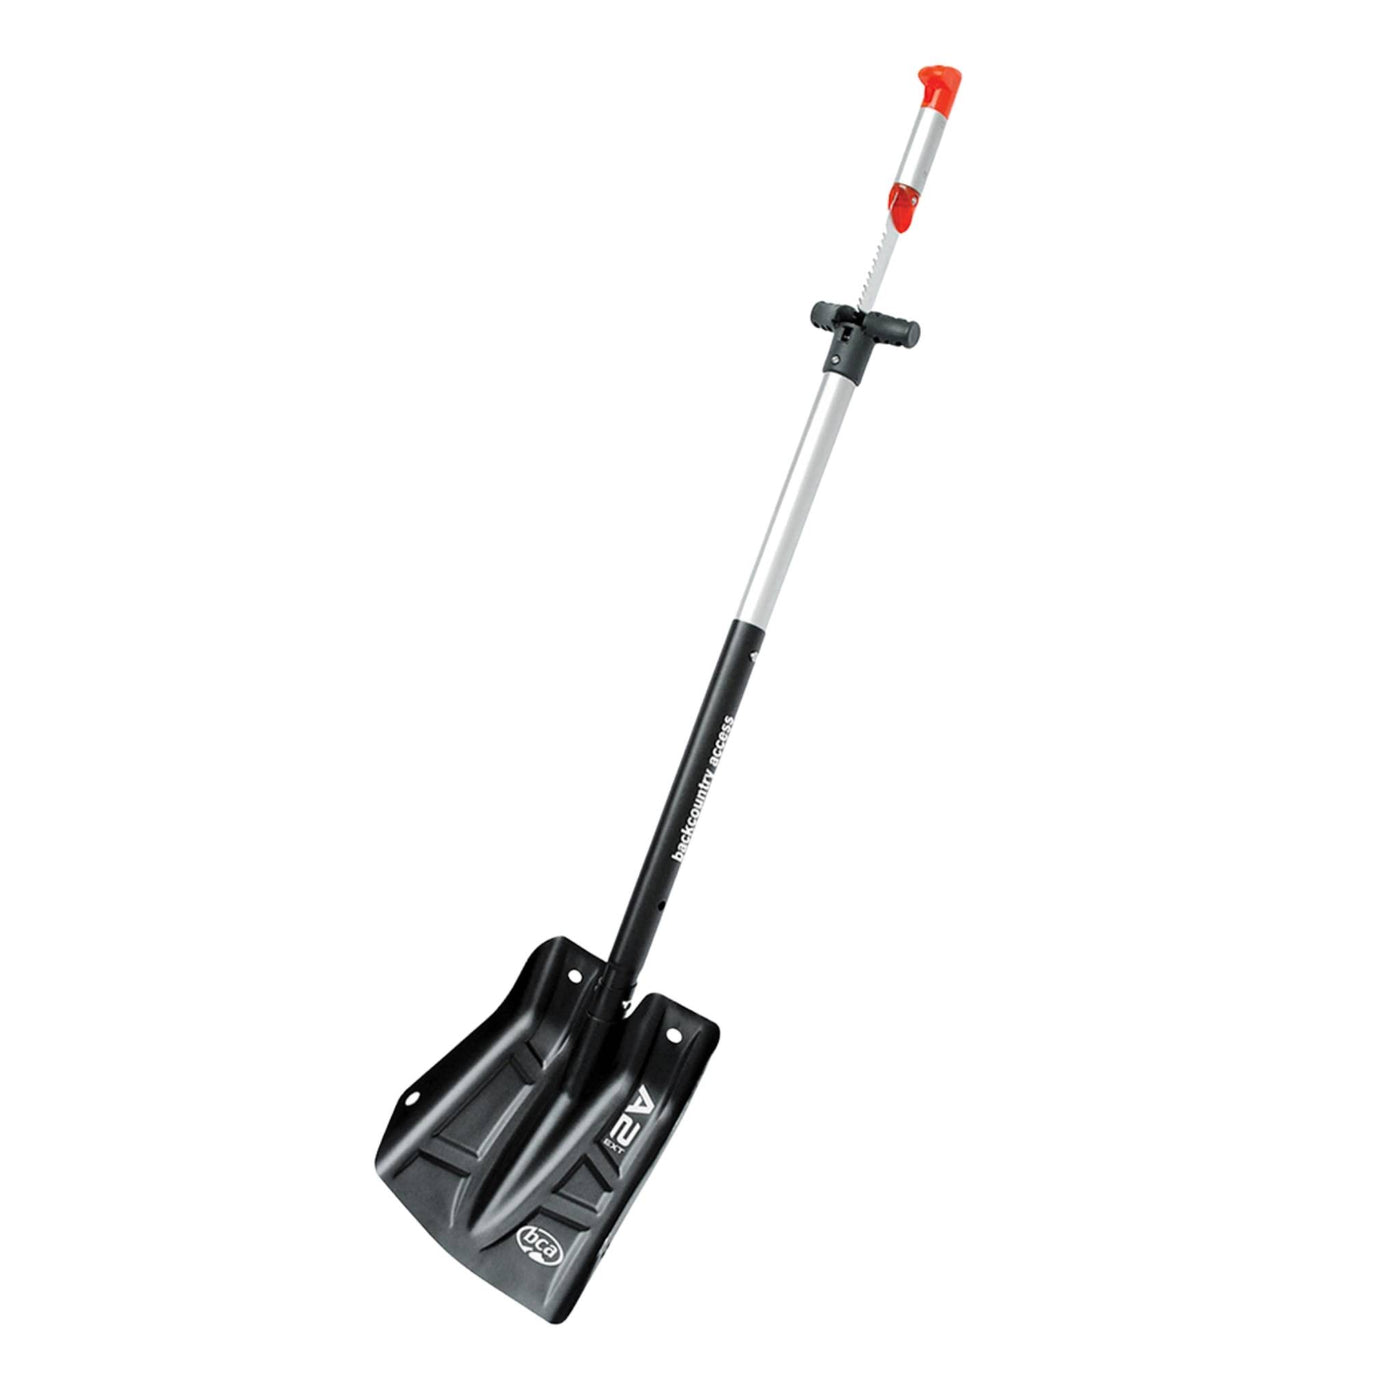 Backcountry Access Shovel A-2 w/Saw | Avalanche Shovels | Further Faster Christchurch NZ